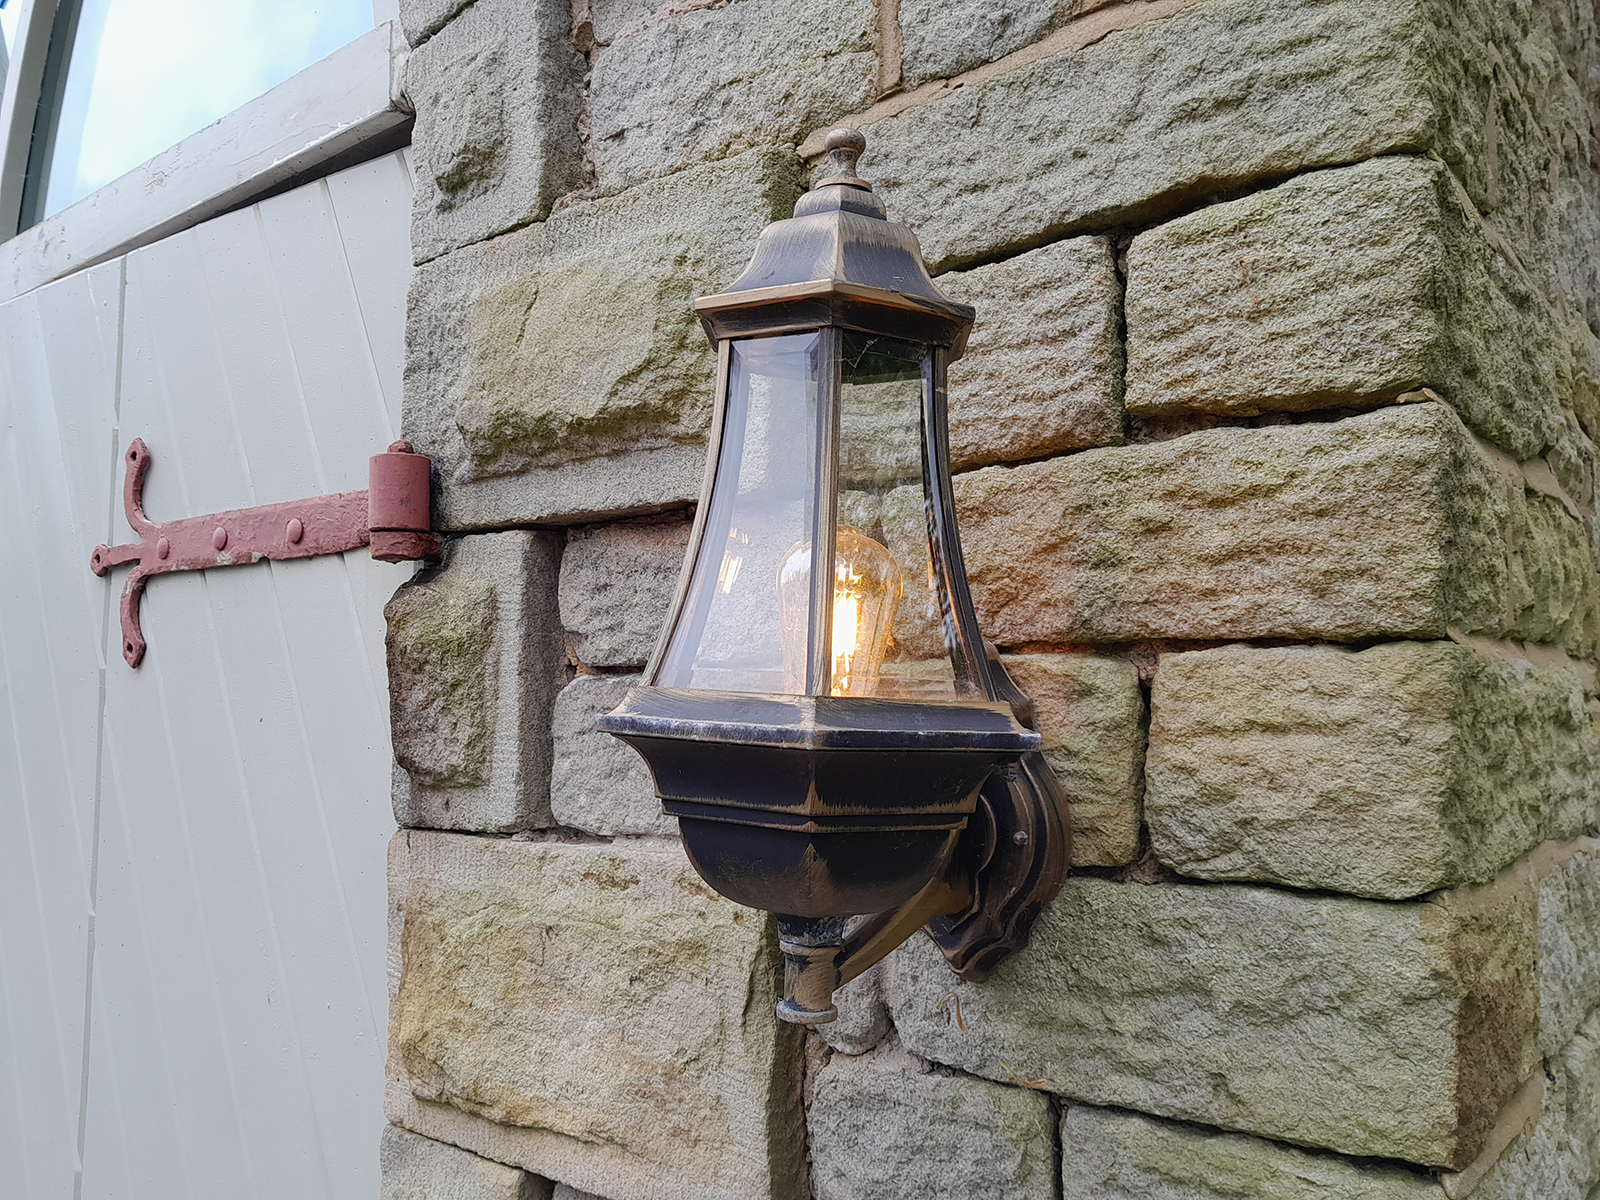 Samsung Galaxy A13 camera sample showing a lantern in the day